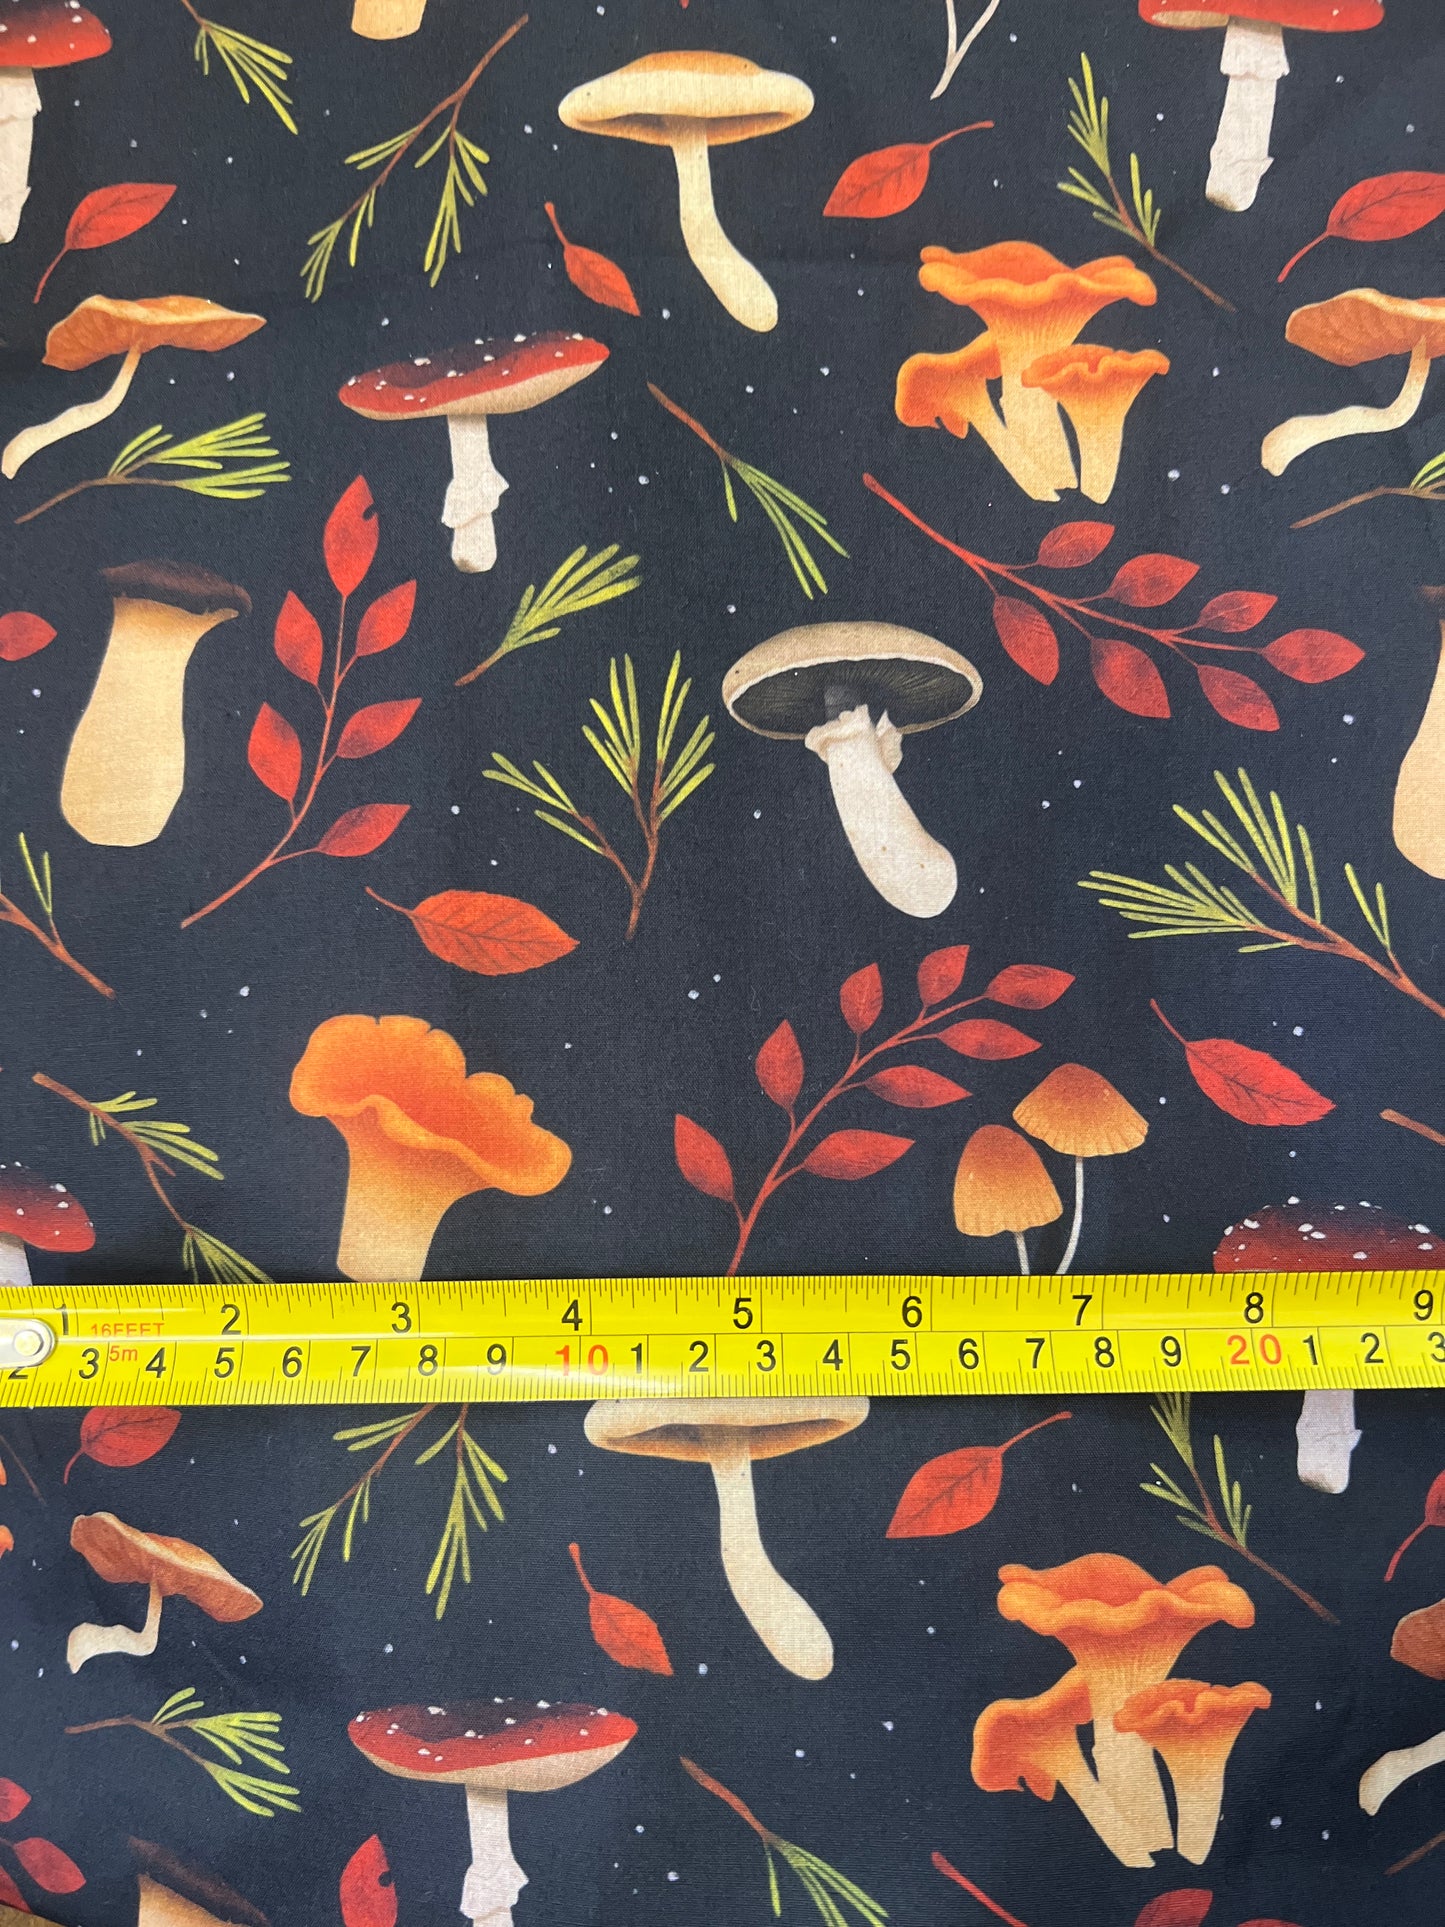 FOREST FLOOR - Polycotton Fabric from Japan